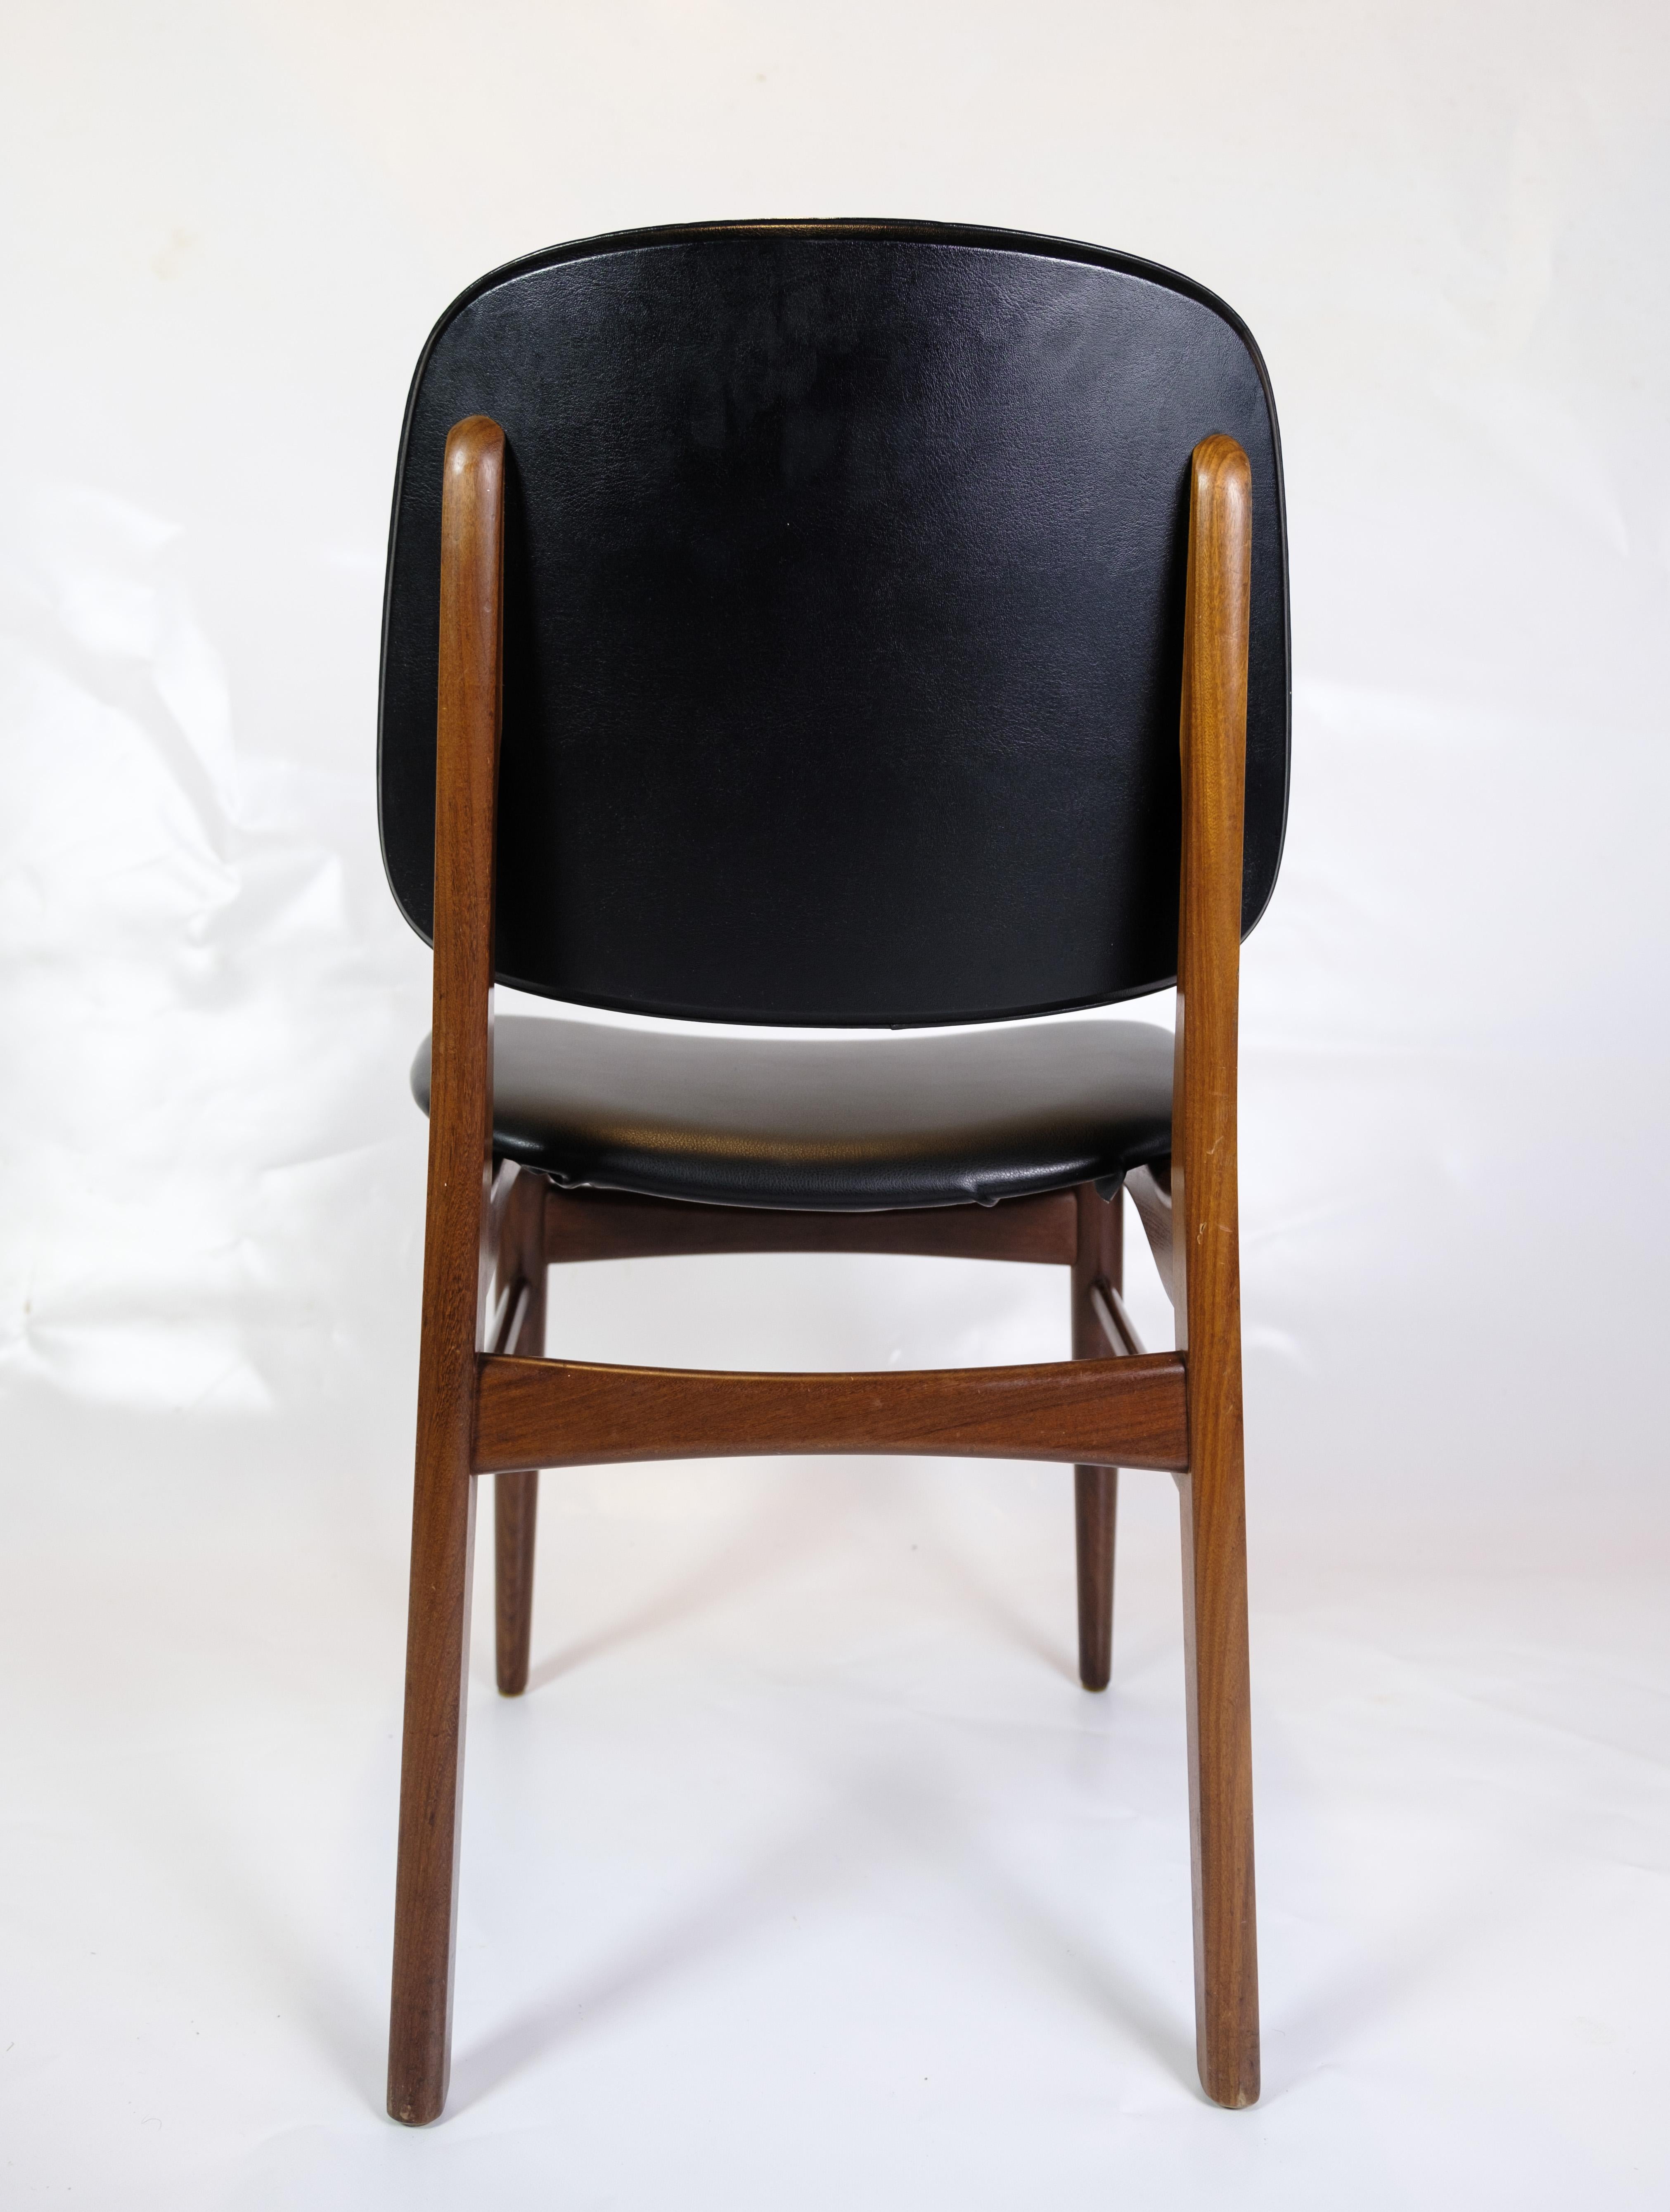  Set of six Teak Dining Chairs by Danish Master Craftsman from 1960s For Sale 3